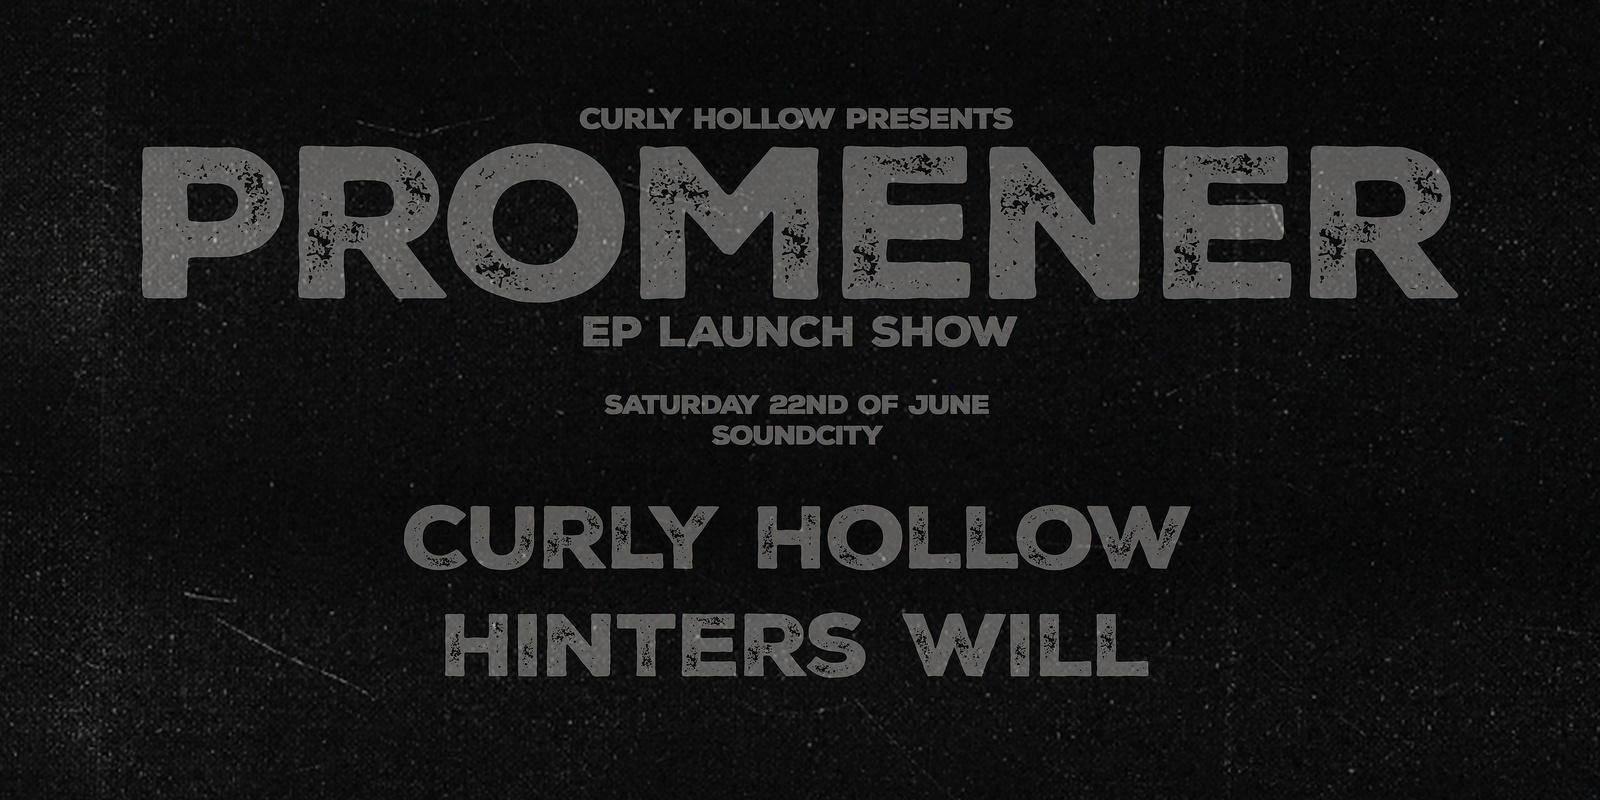 Banner image for Curly Hollow Promener EP Launch - SoundCity